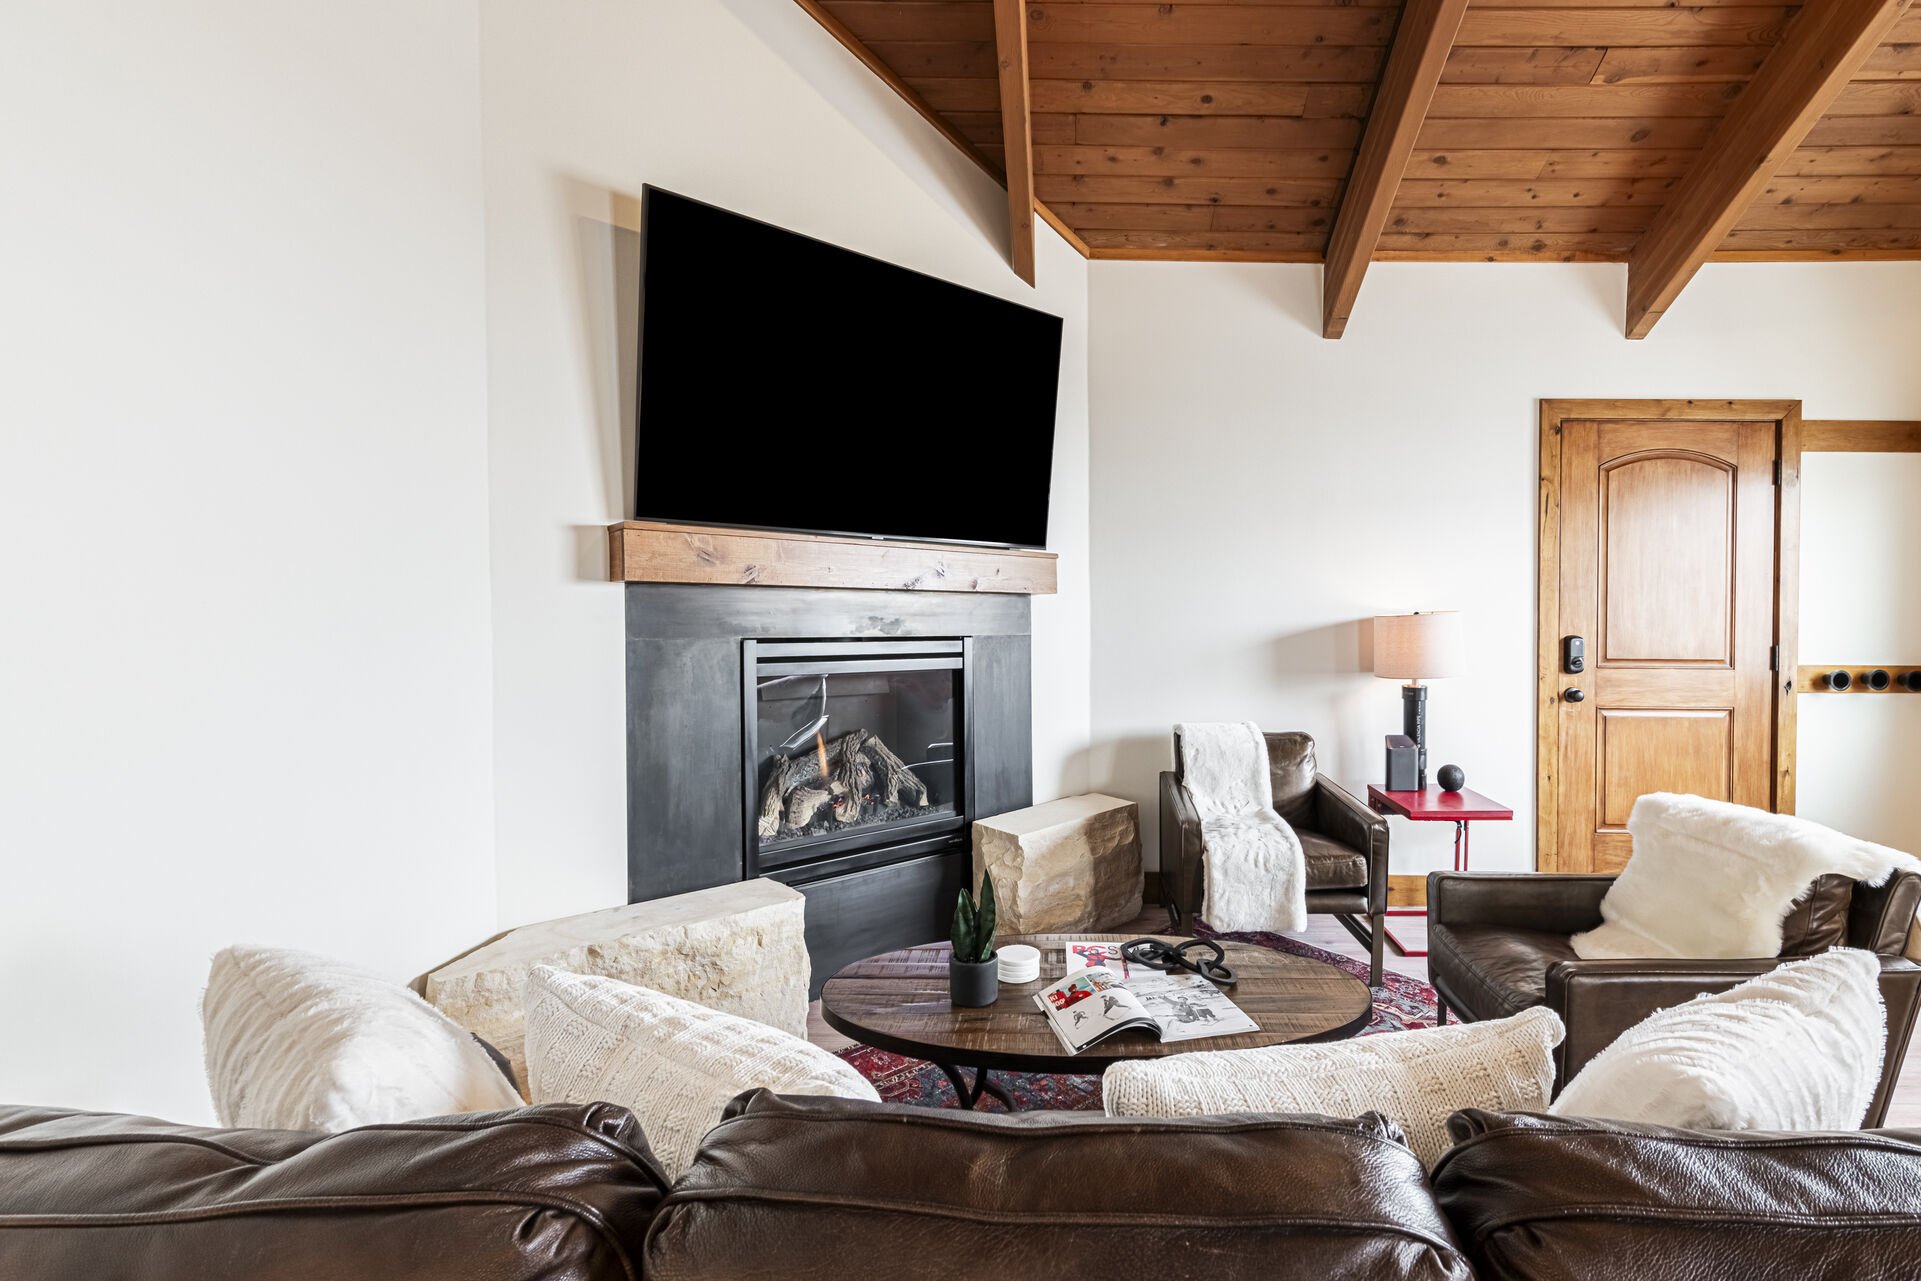 Living Area with Gas Fireplace, Leather Full-size Sleeper Sofa, and Smart TV